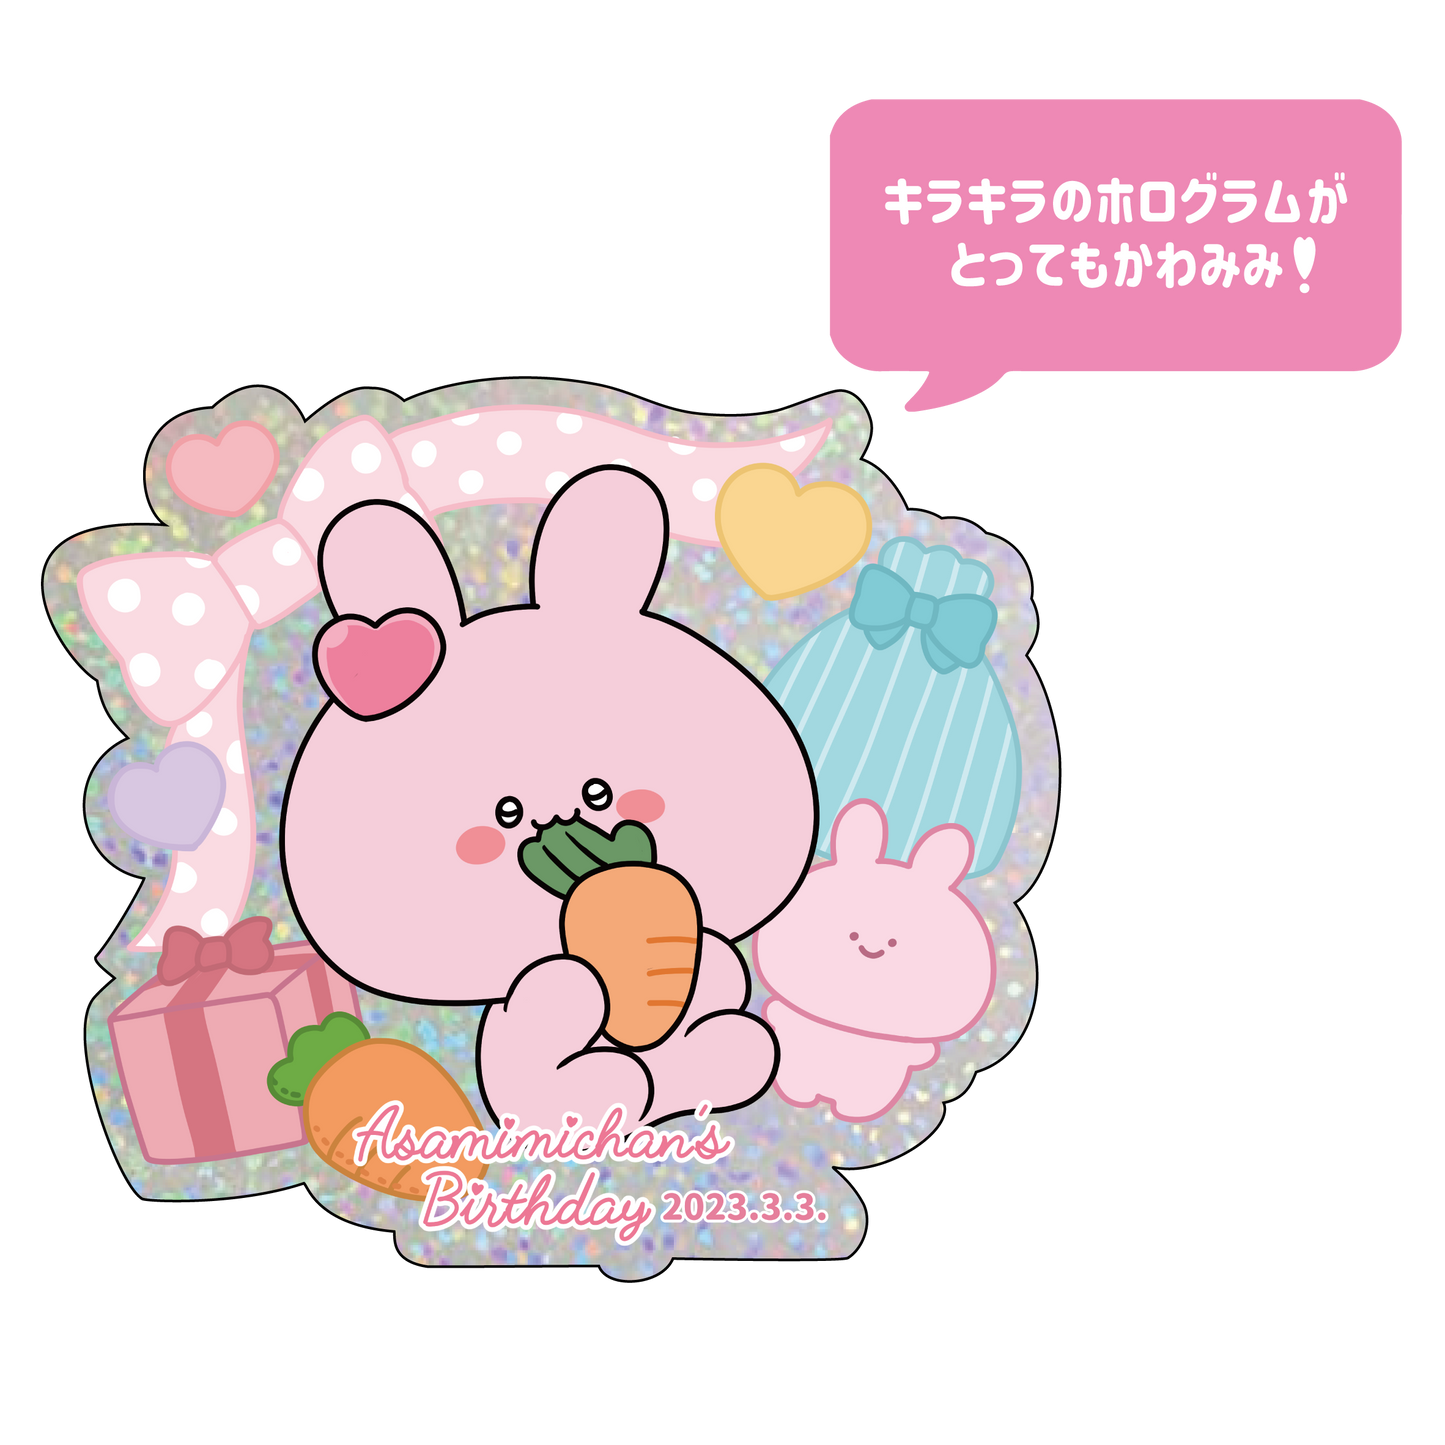 [Asamimi-chan] Asamimi Birthday (Slightly recommended set) [Shipped in early April]